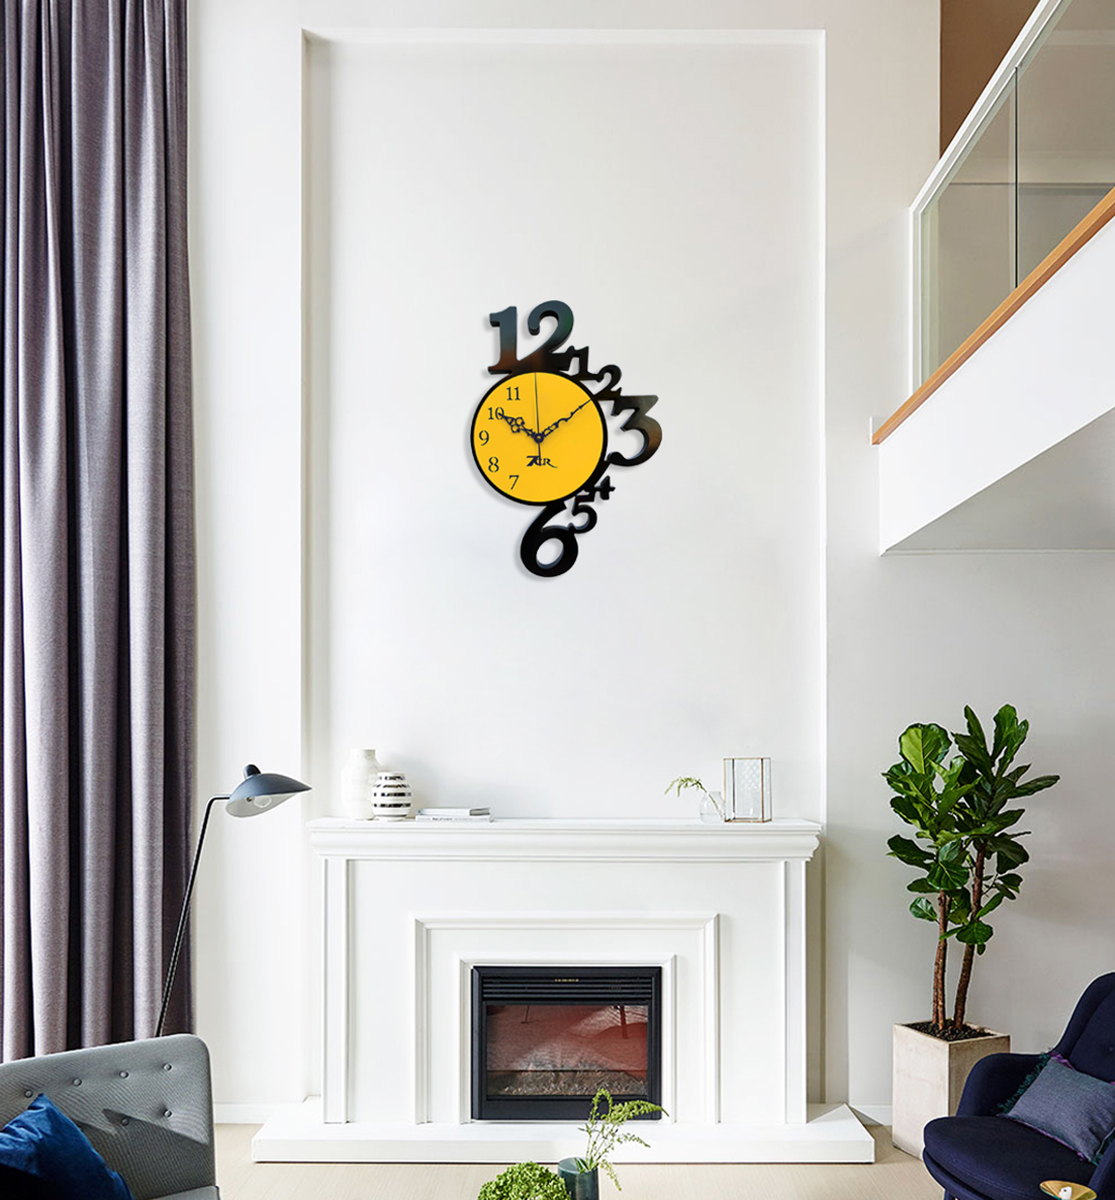 12 to 6 wall clock